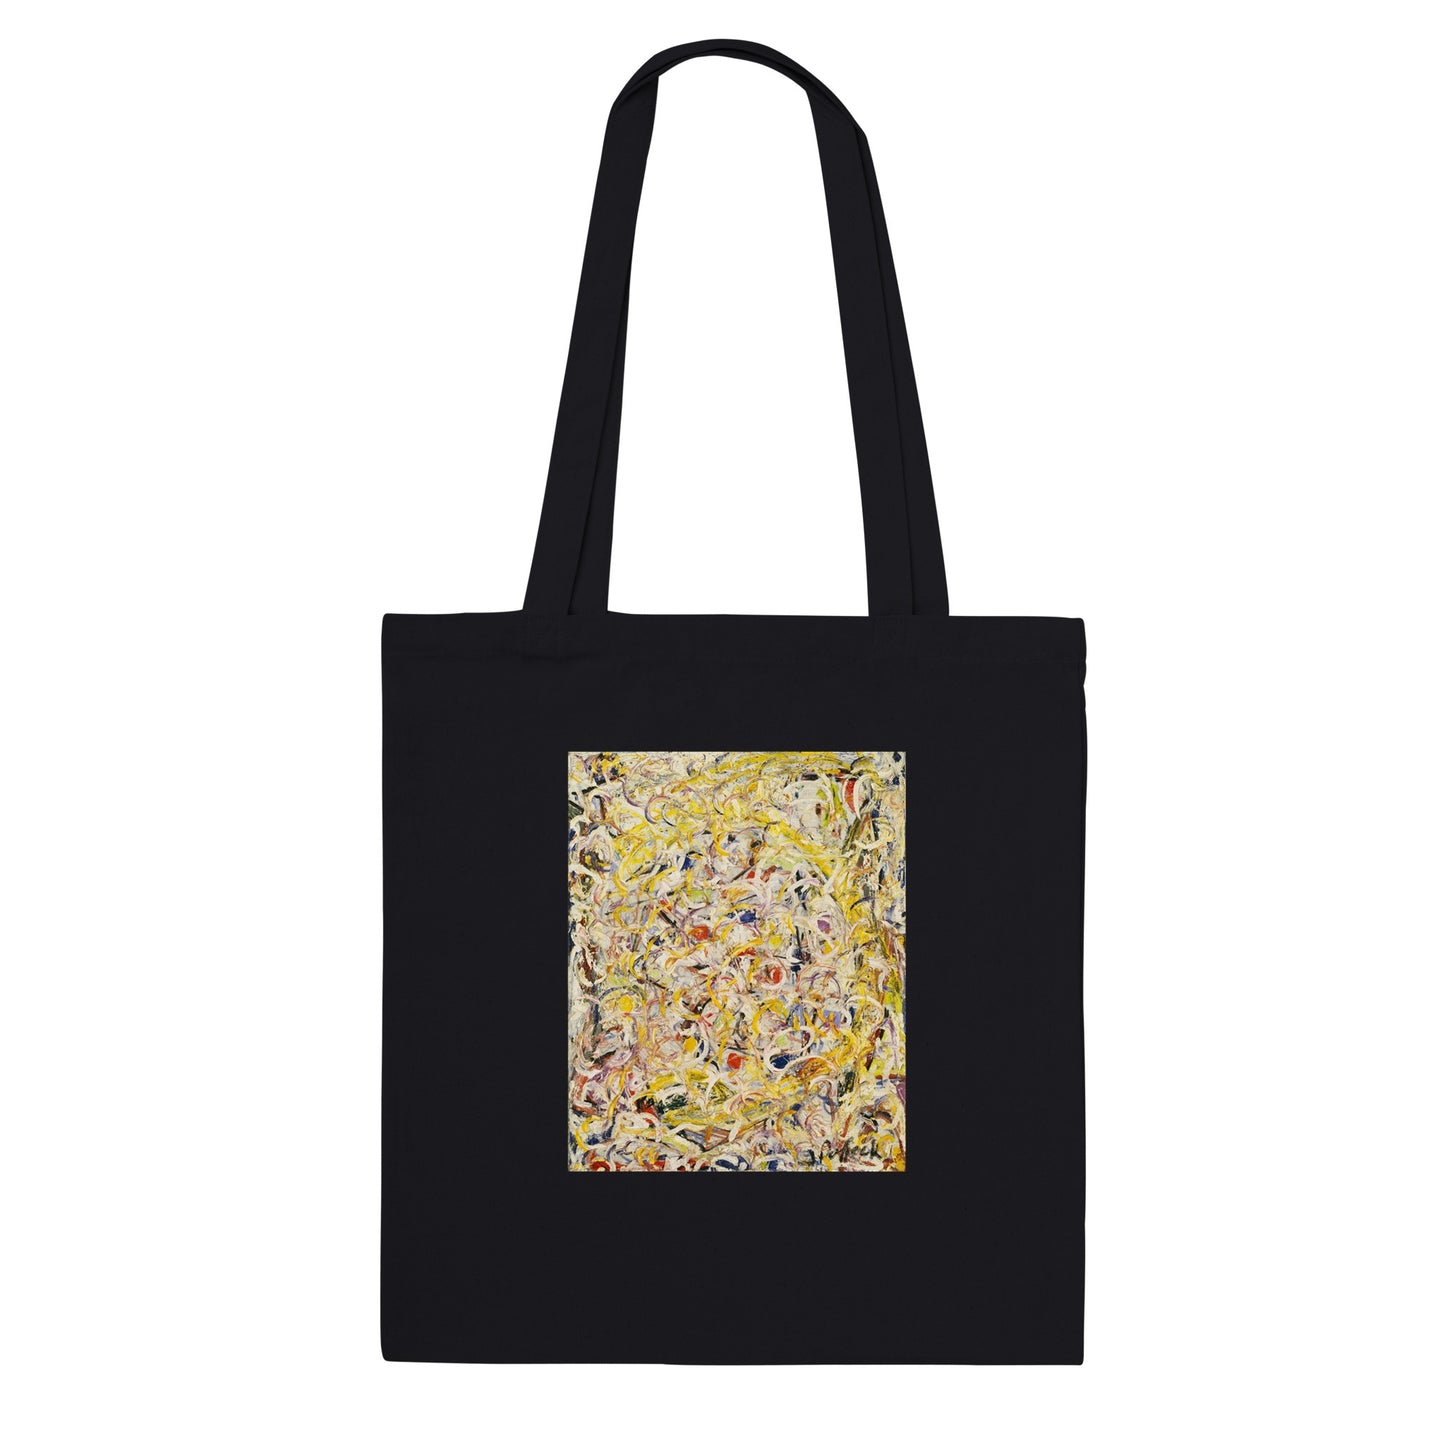 JACKSON POLLOCK - SHIMMERING SUBSTANCE - CLASSIC TOTE BAG